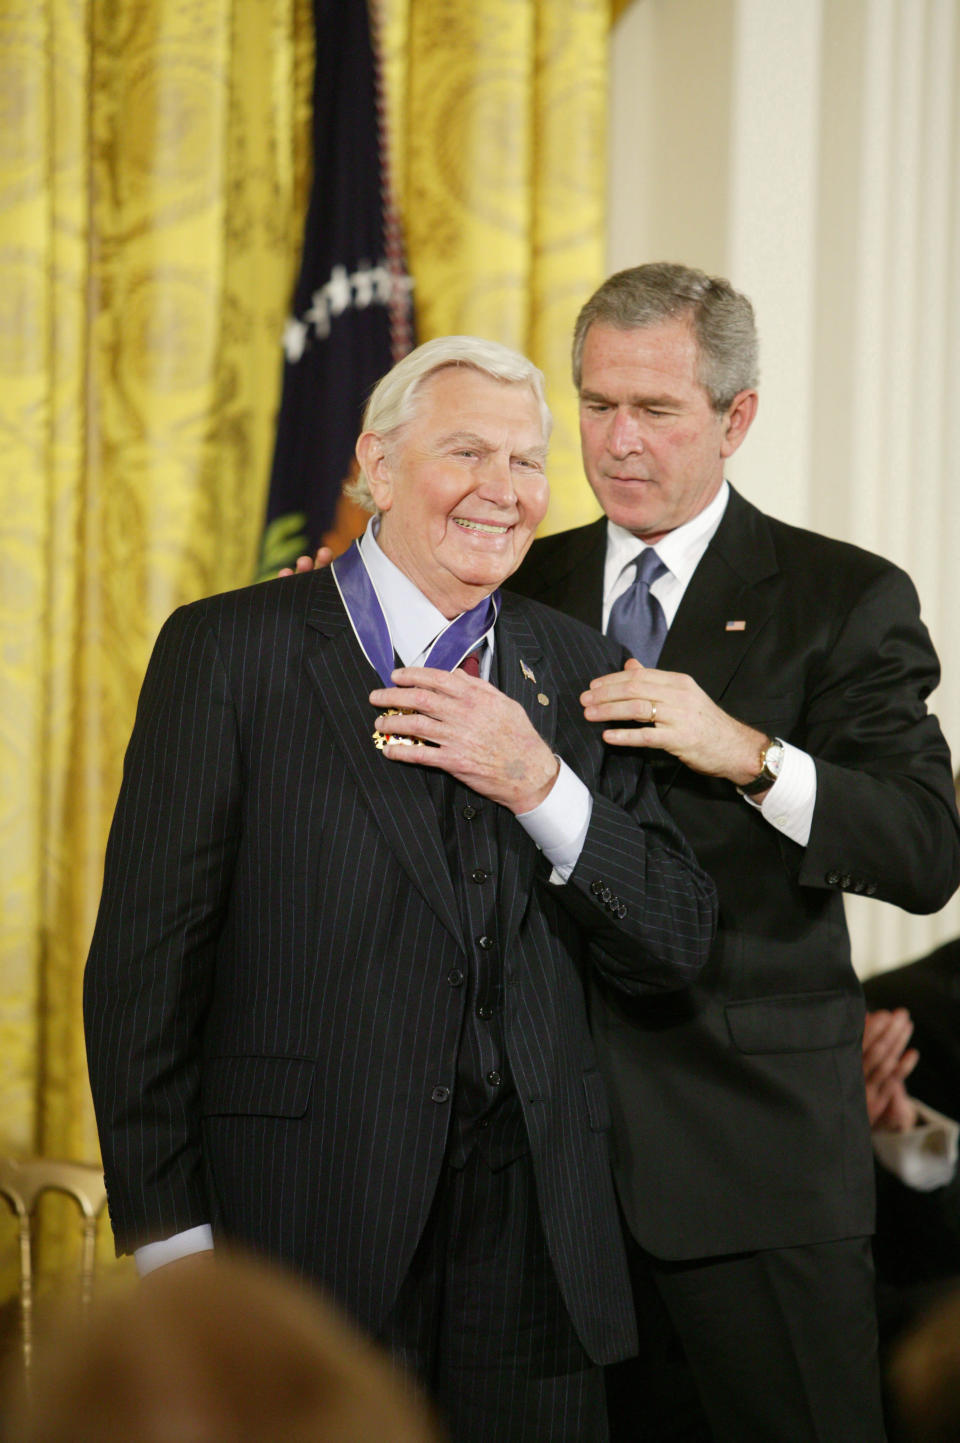 UNITED STATES - NOVEMBER 09: Andy Samuel Griffith and President George W. Bush at the Freedom Awards Ceremony at the White House in Washington D.C. on November 9, 2005. (Photo by Douglas A. Sonders/Getty Images)